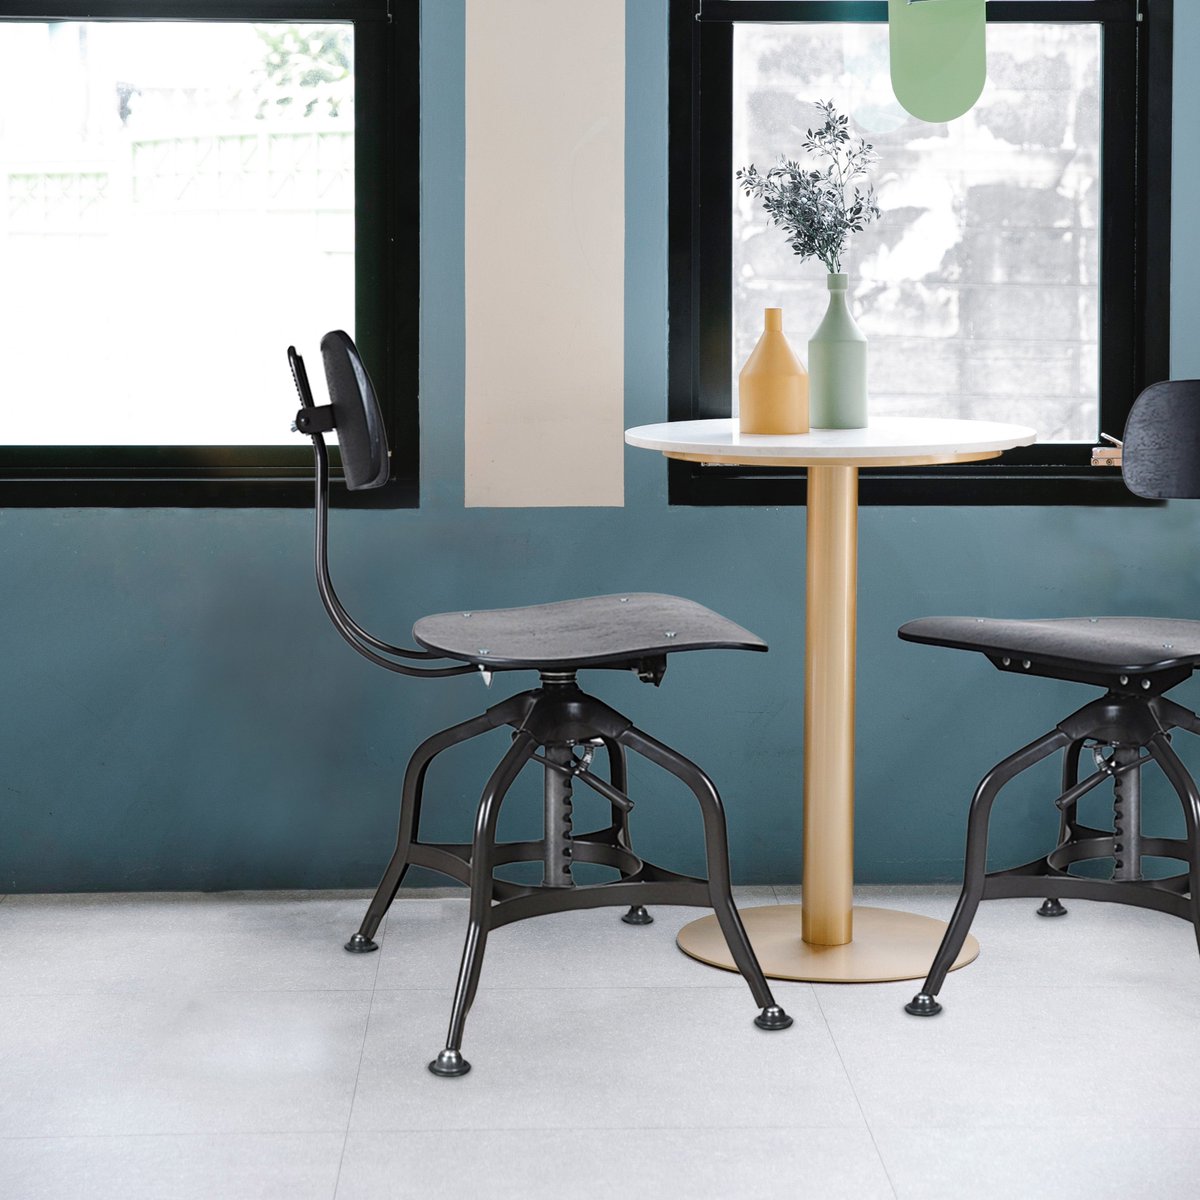 Toledo is known for its overall industrial metal construction and height-adjustable sturdy wooden seat plate.
#Toledo #WoodenChair #DiningChair #Industrial